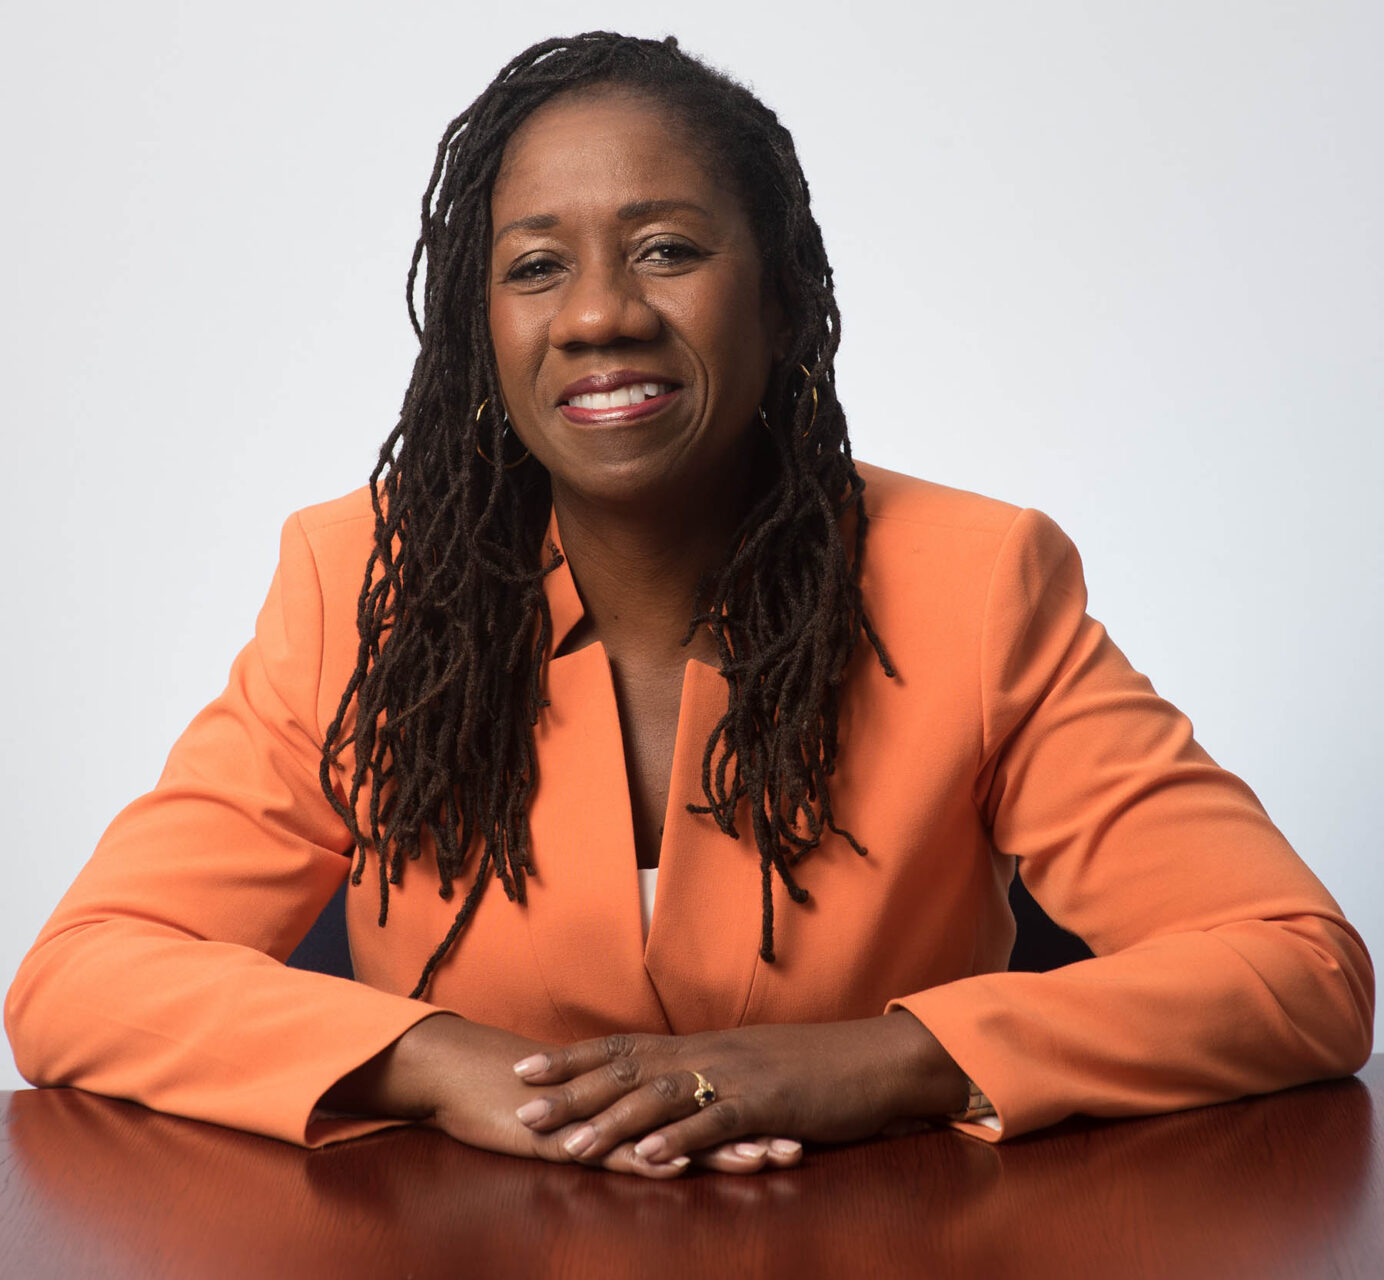 Supreme Court Justice Candidate - Sherrilyn Ifill